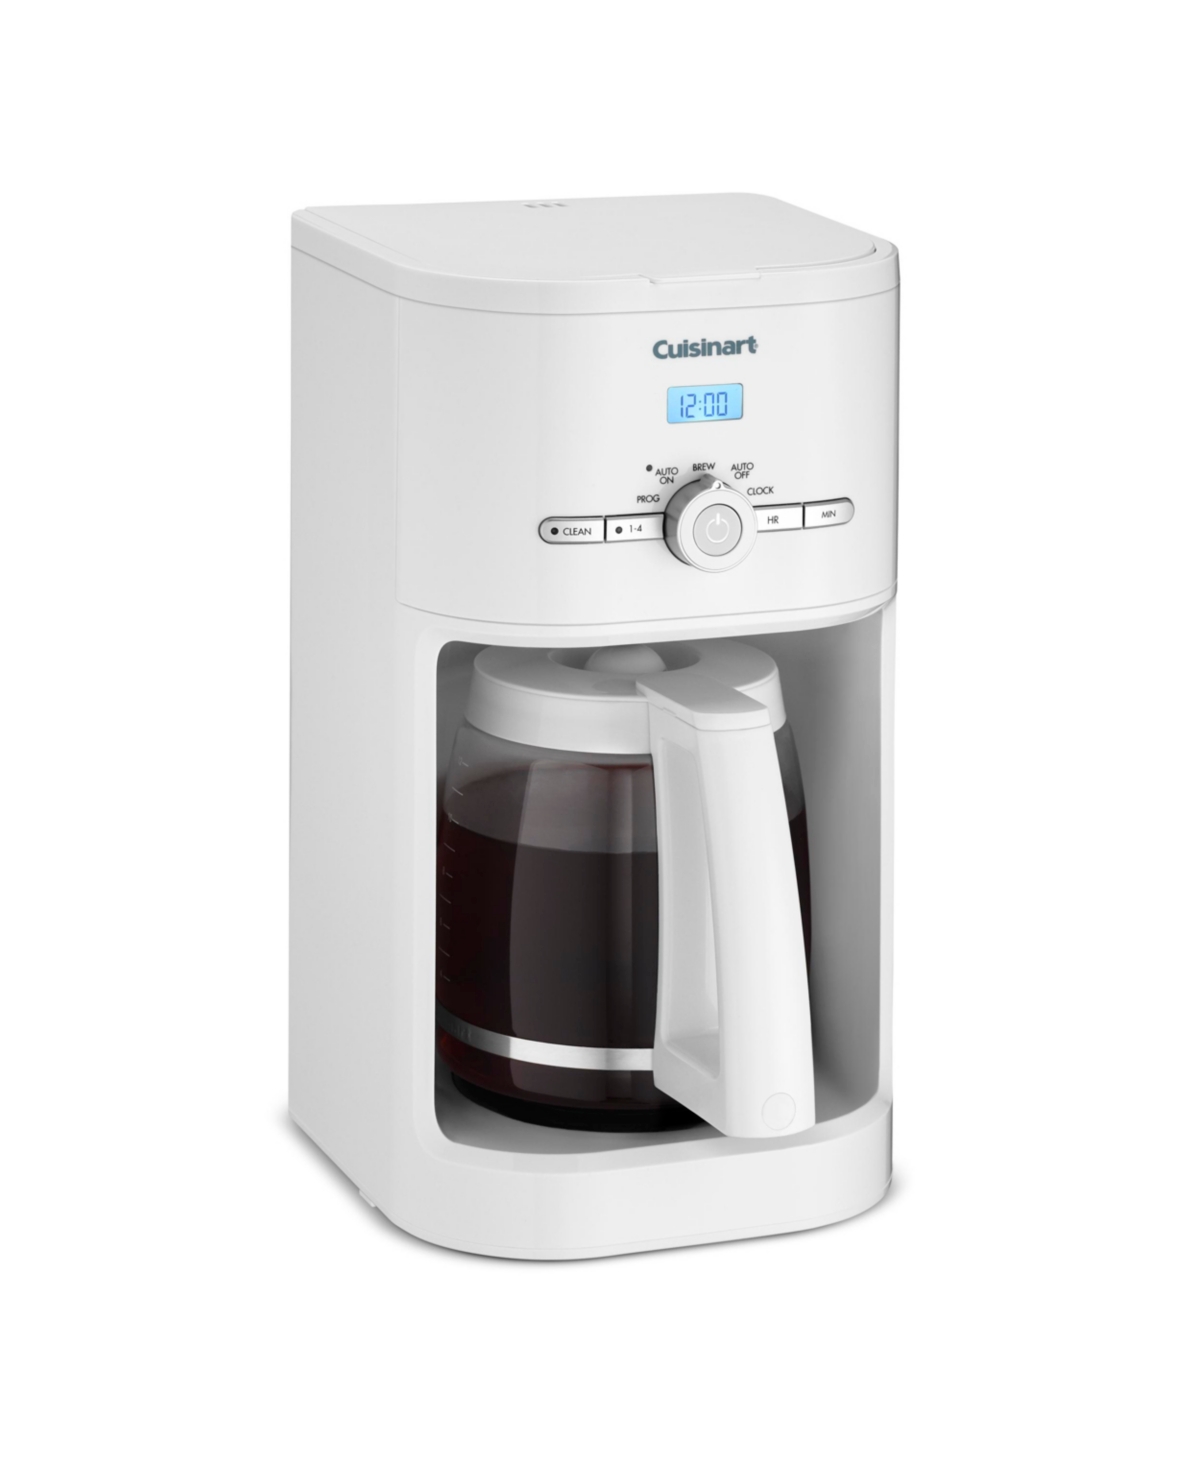 Cuisinart 12 Cup Classic Coffee Maker